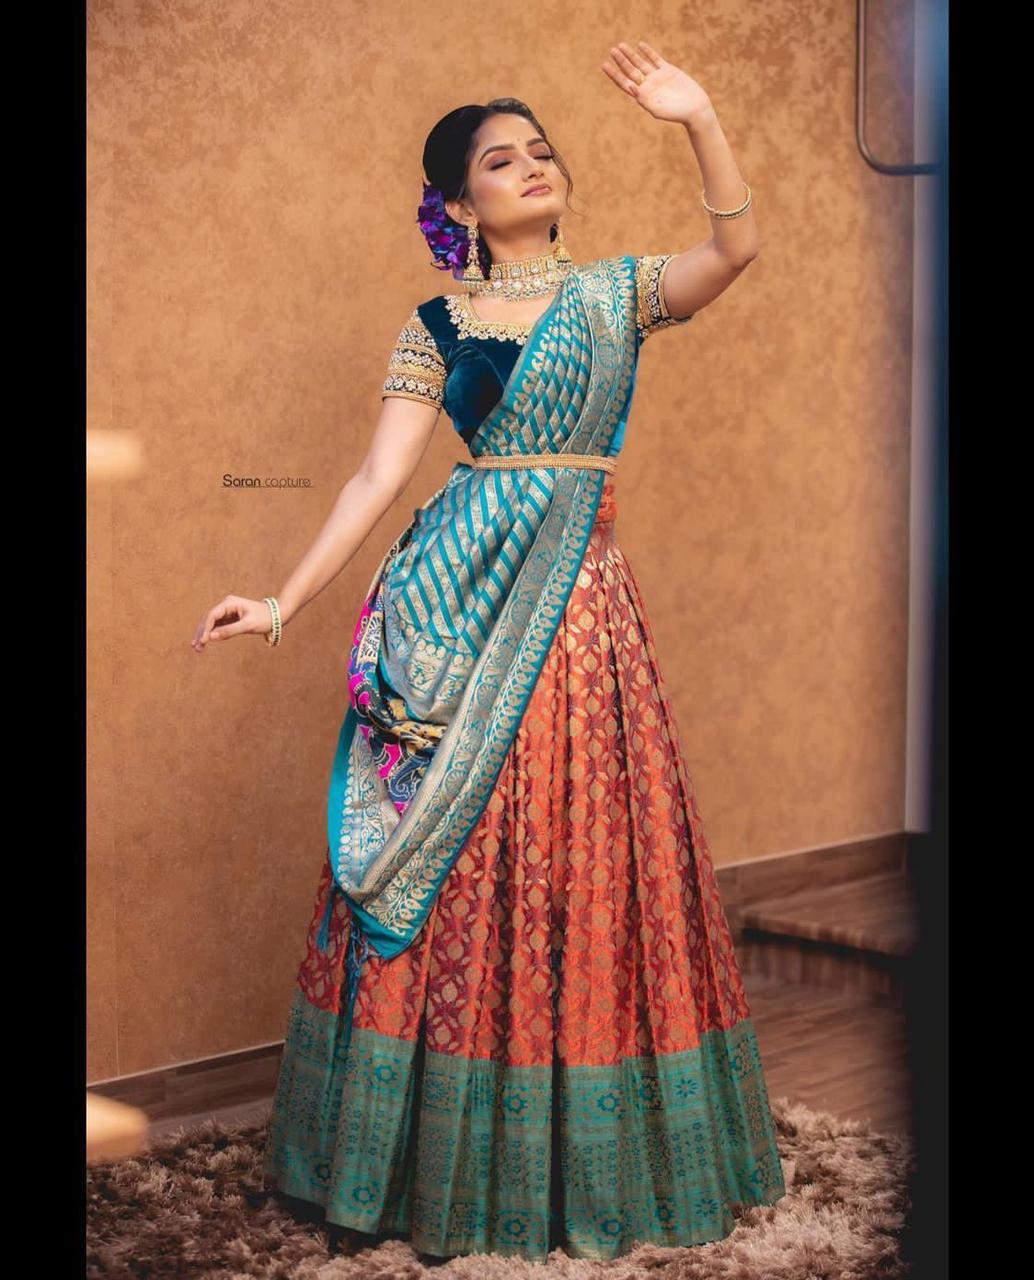 South Indian Style Saree Wearing | suturasonline.com.br